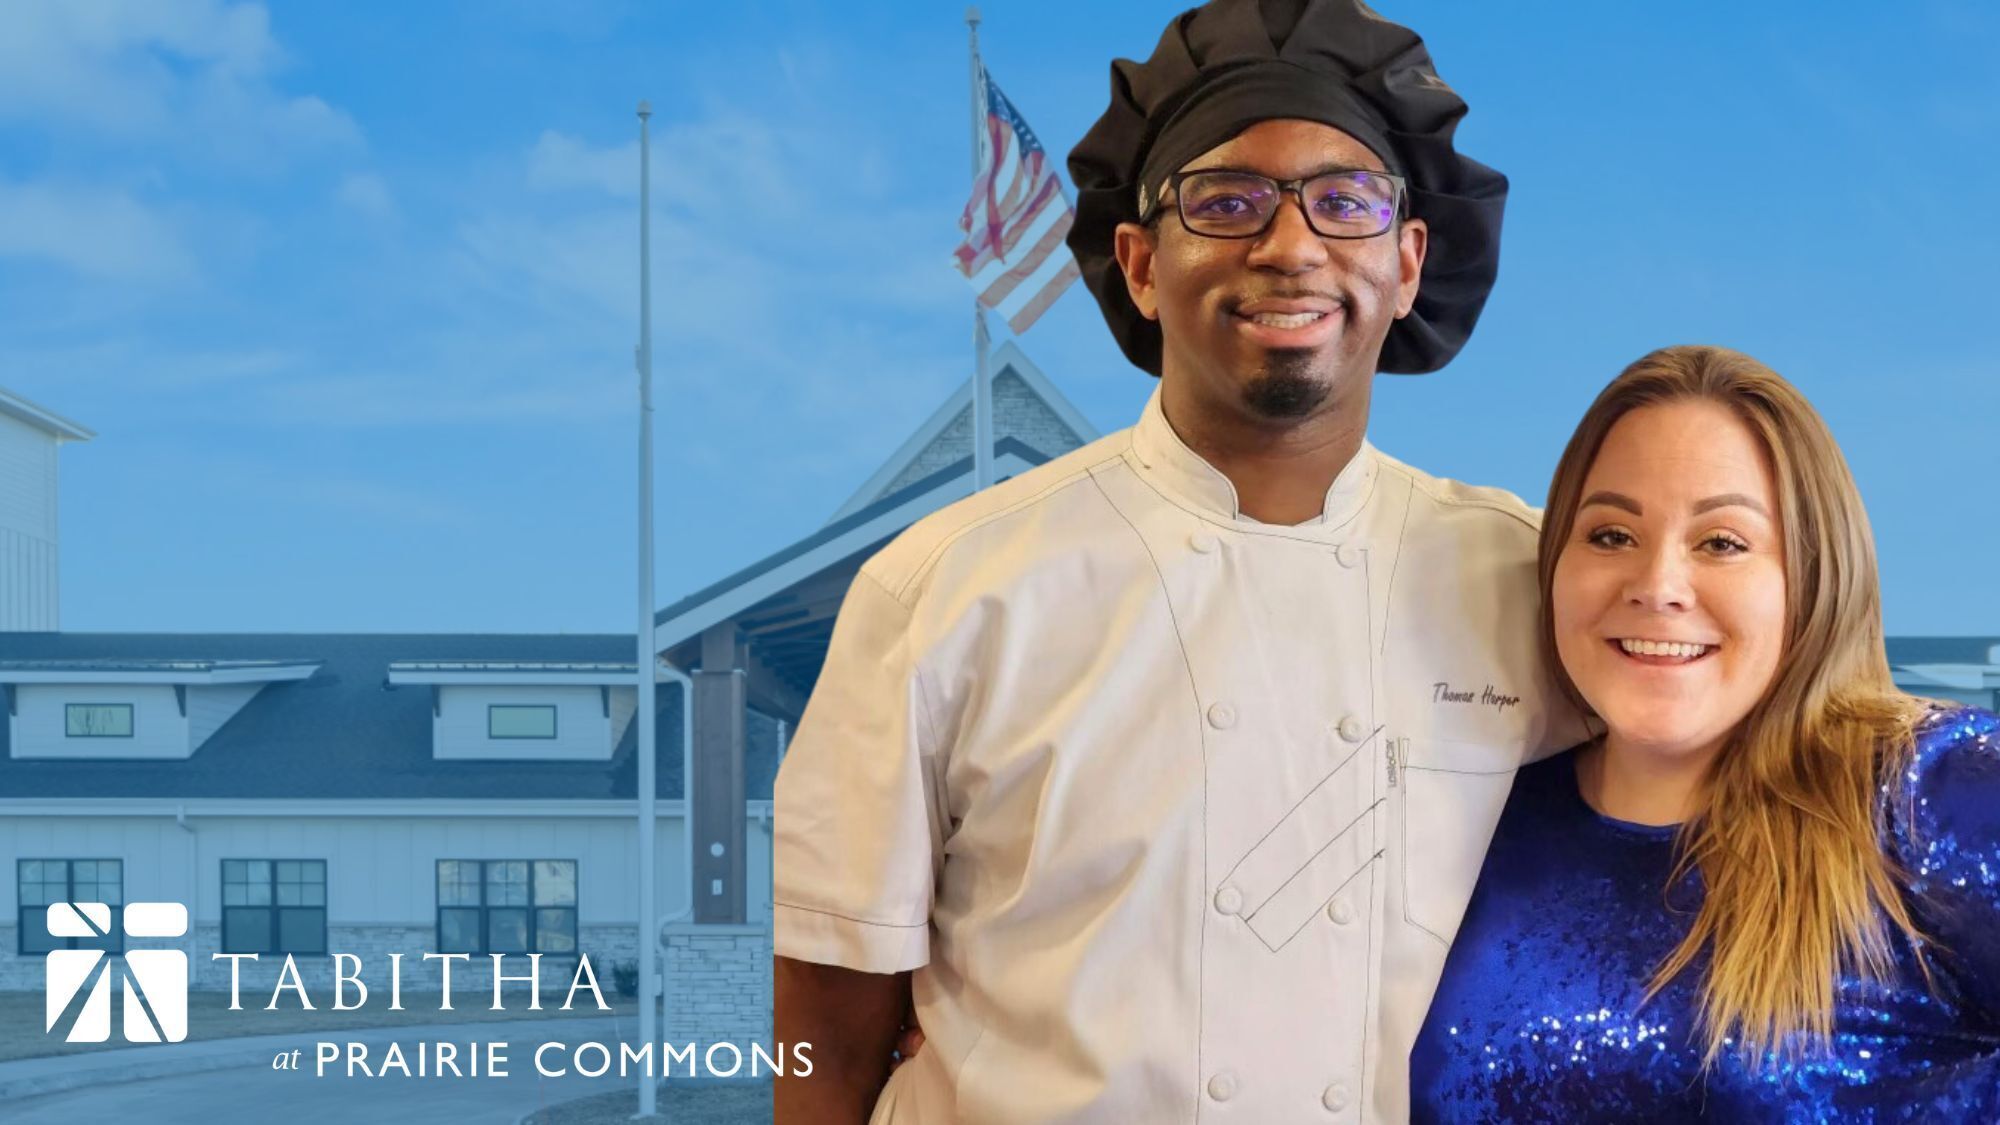 Thomas Harper Brings Culinary Excellence to Tabitha at Prairie Commons